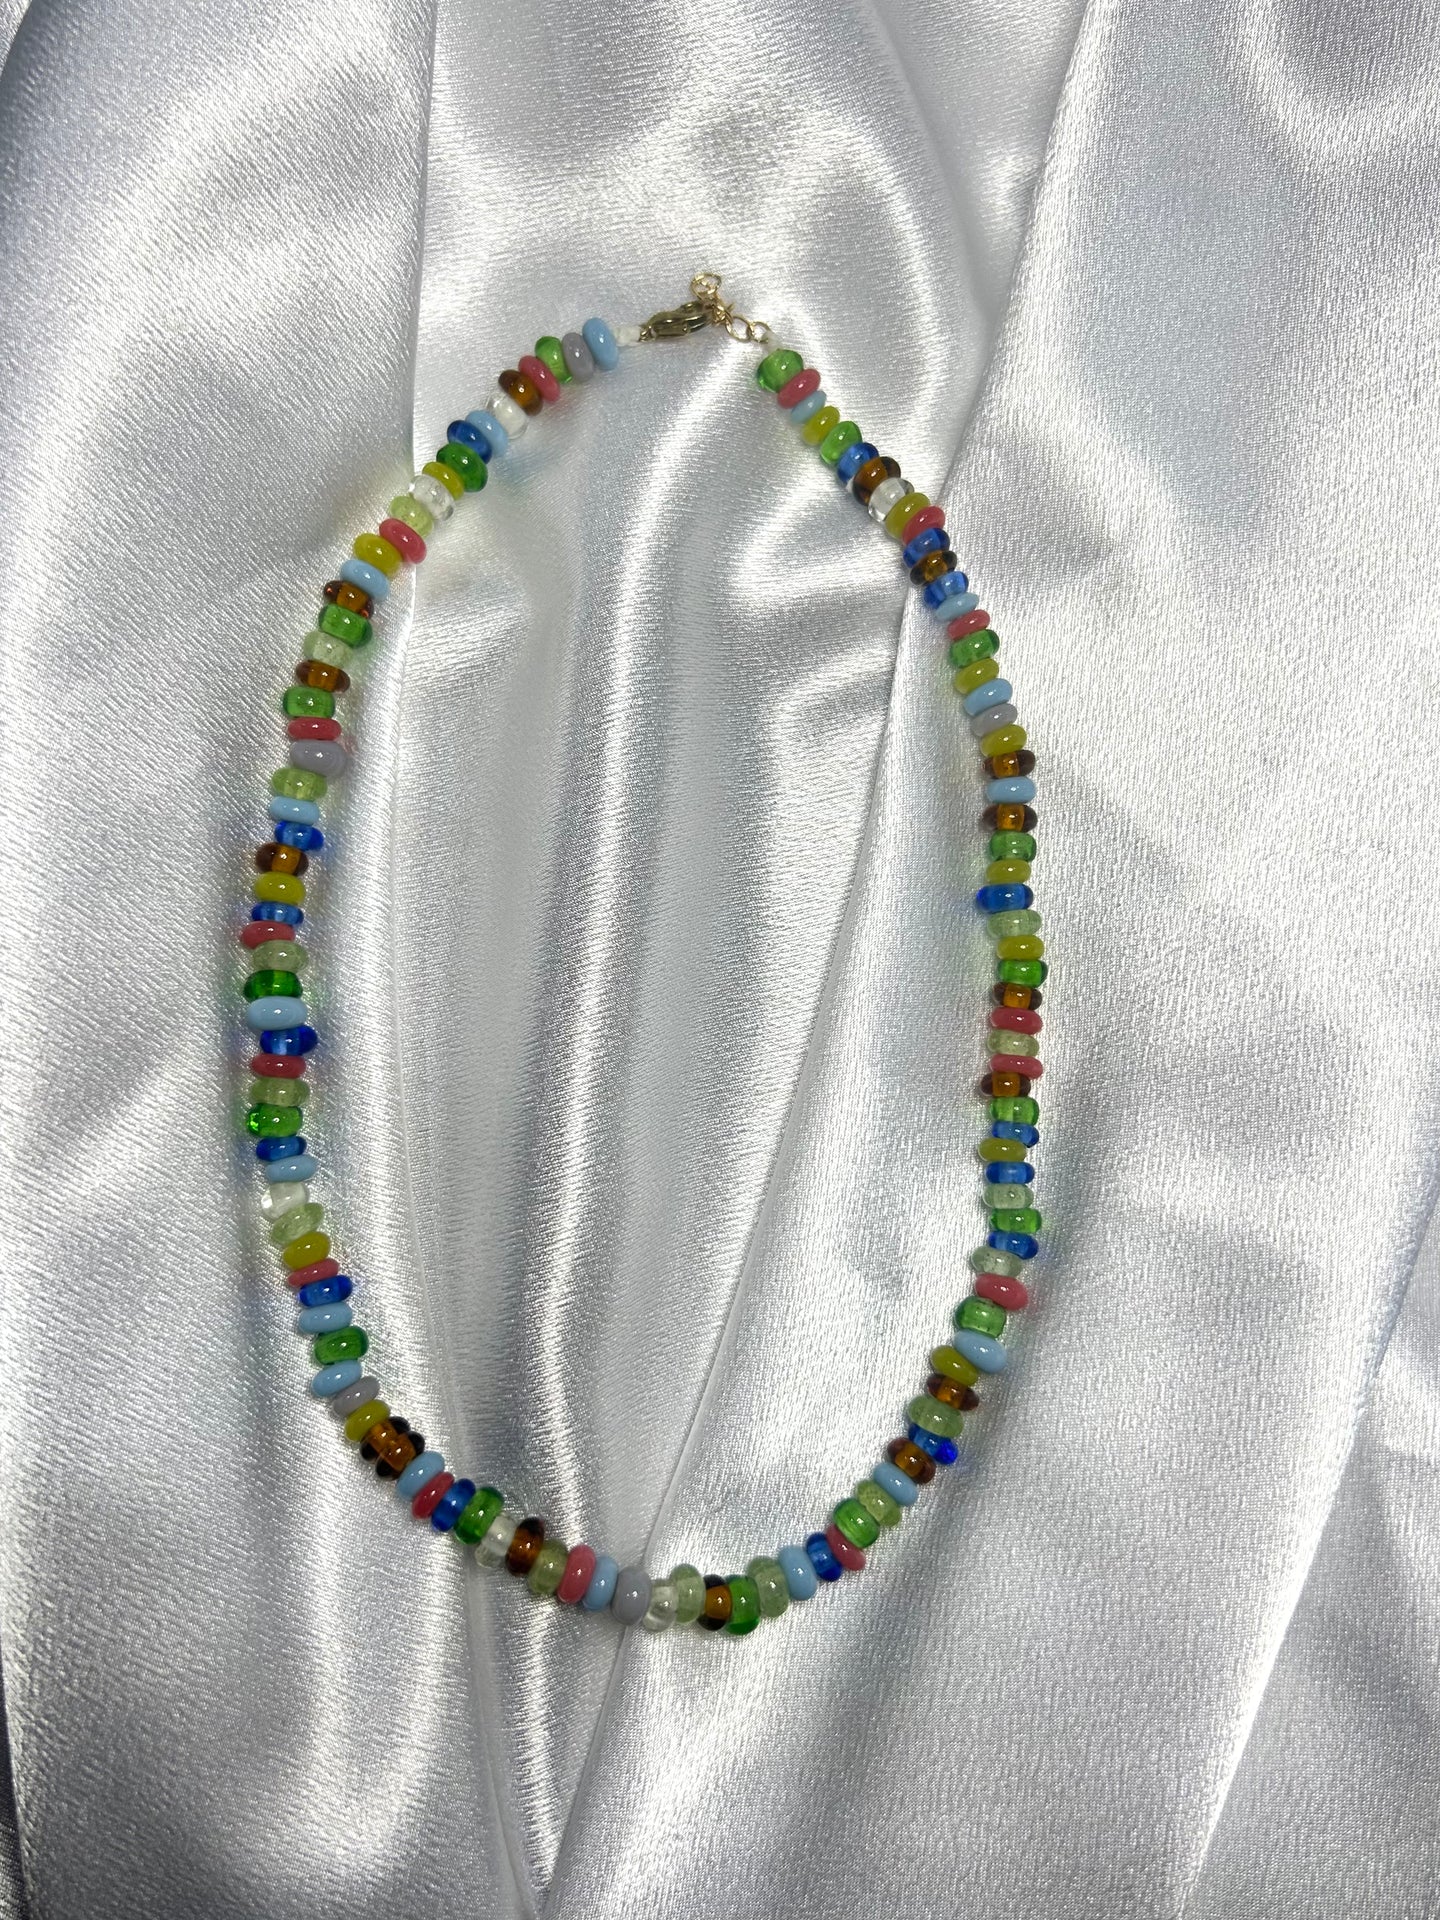 Chunky colorful necklace